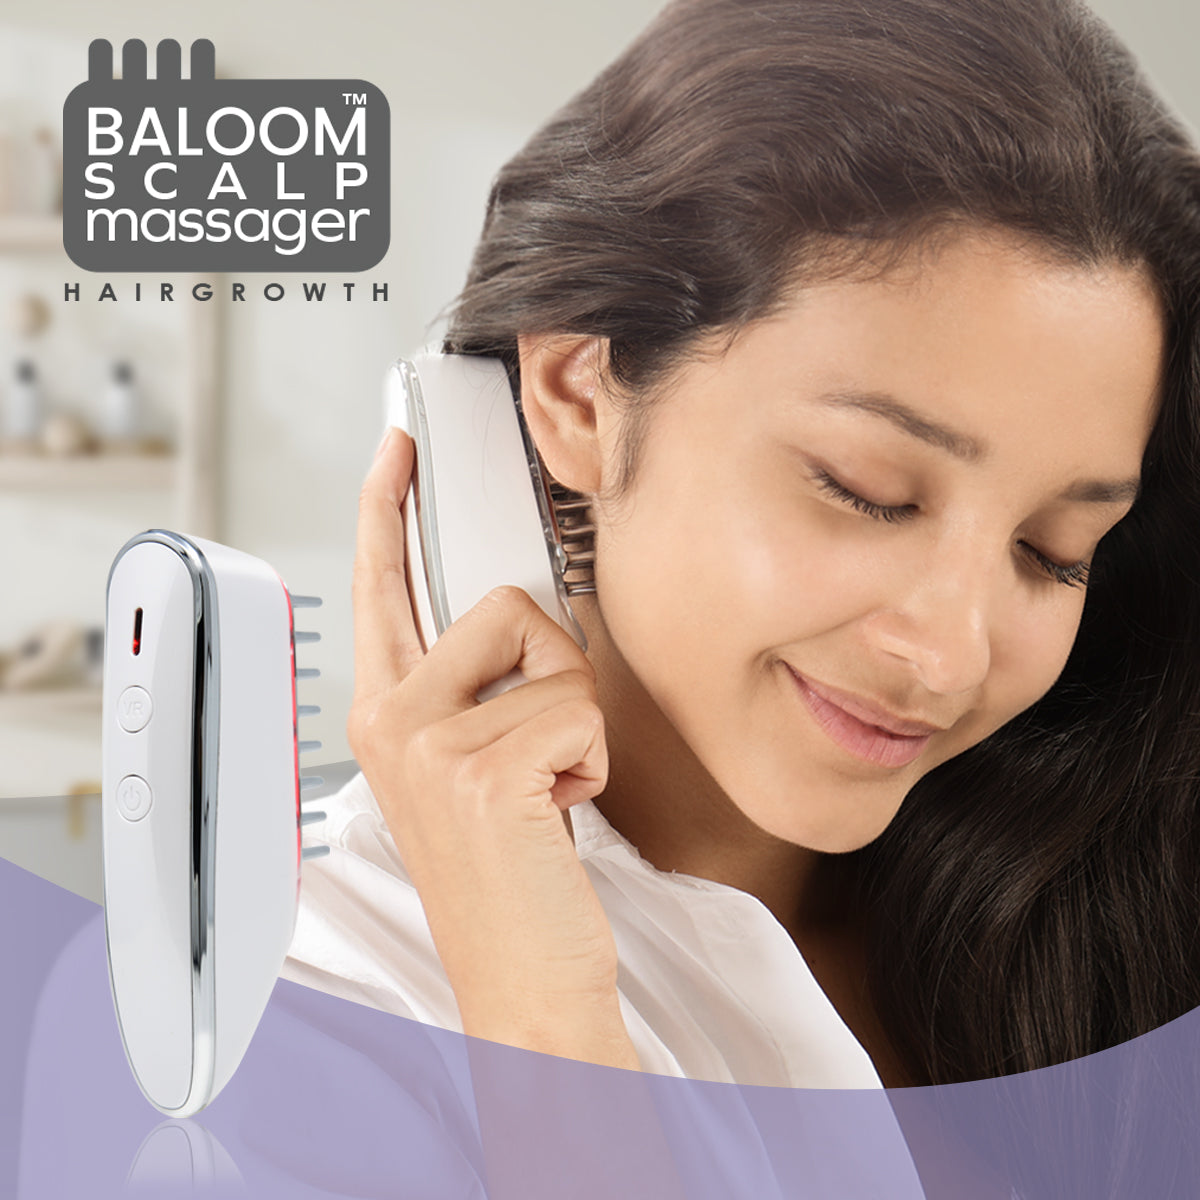 Baloom 4-in-1 Scalp Massager is a home therapy for your hair growing thicker and shinier.